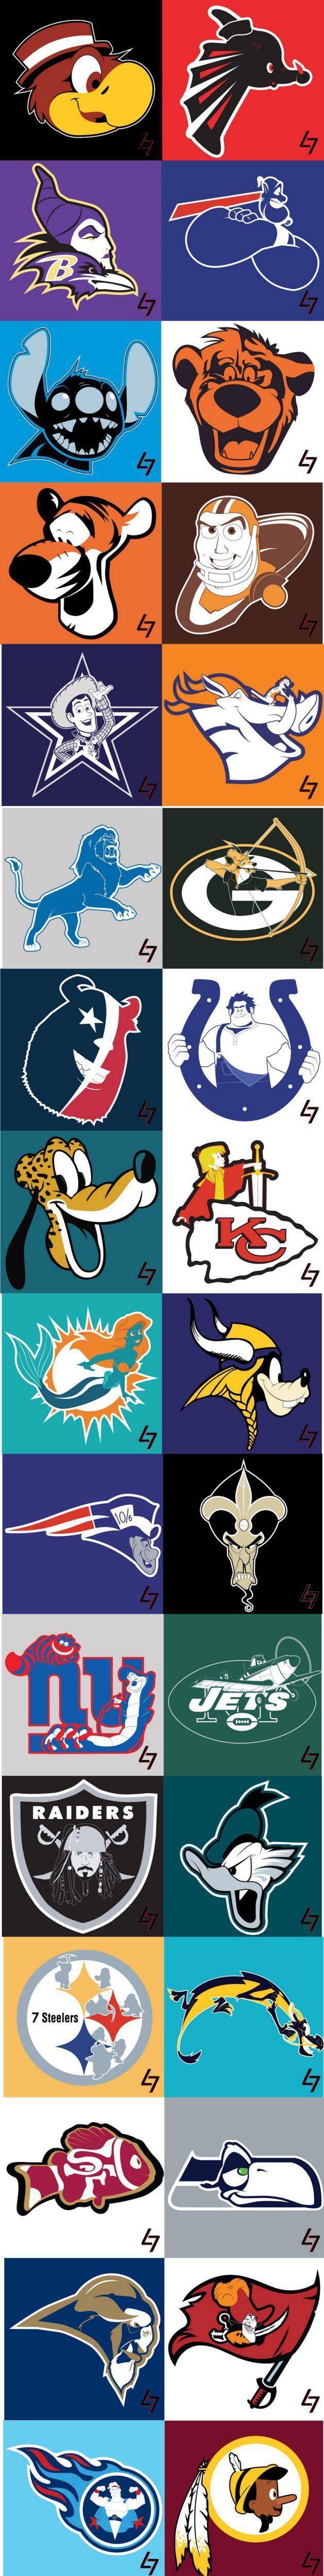 Disney Characters Logo - NFL logos with Disney characters - Album on Imgur